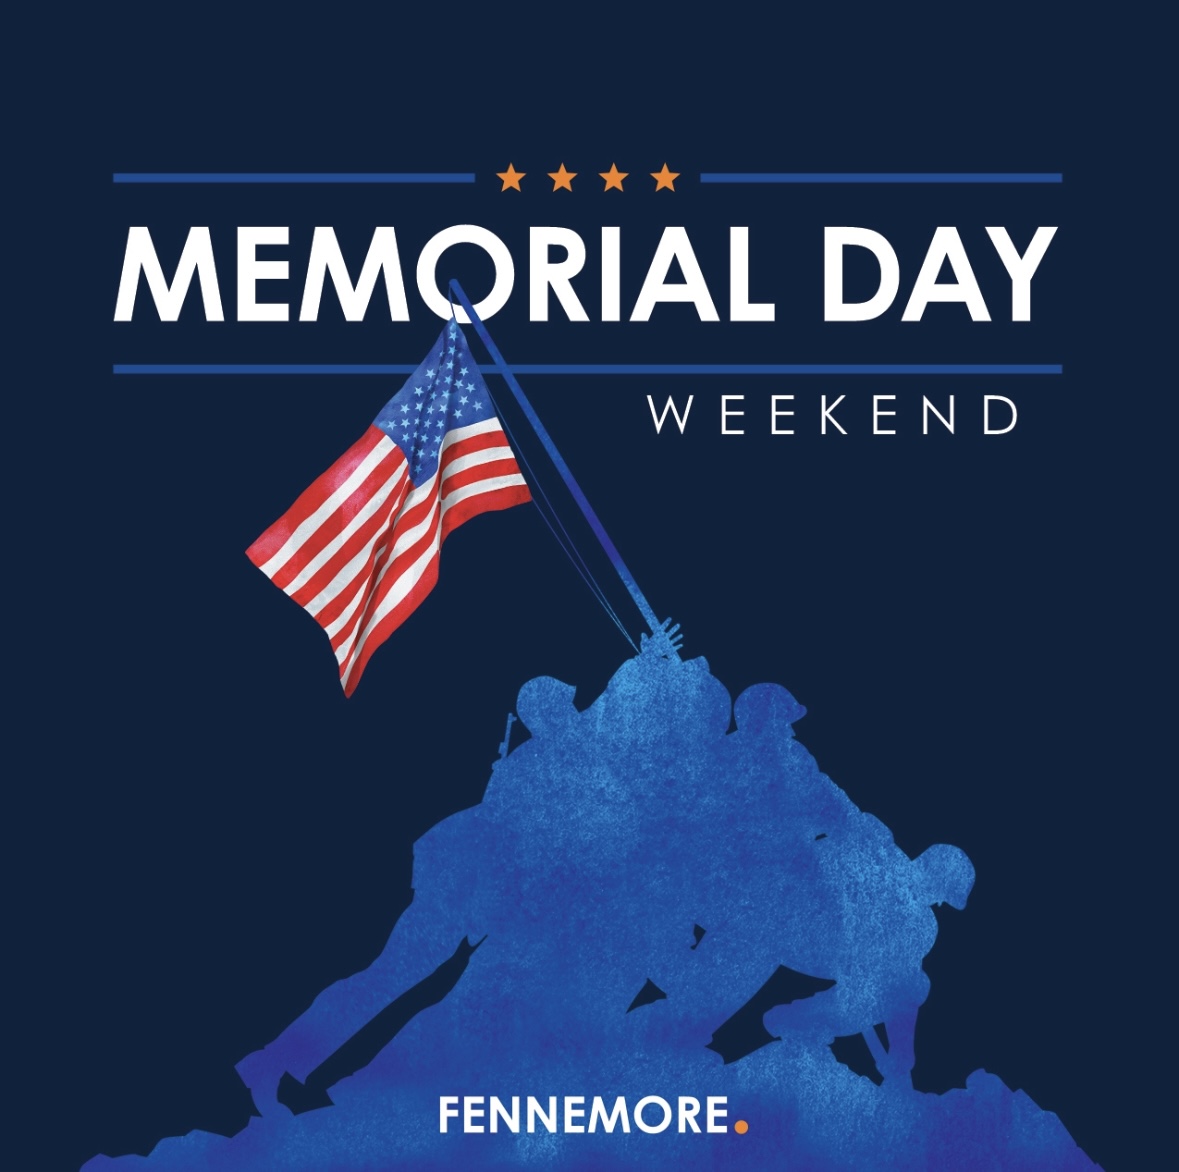 This Memorial Day weekend, Fennemore honors and remembers the brave people who made the ultimate sacrifice for our country. We wish everyone a safe holiday weekend with family and friends.

#MemorialDay #Veterans #ThankYou #MilitaryPersonnel #Fennemore